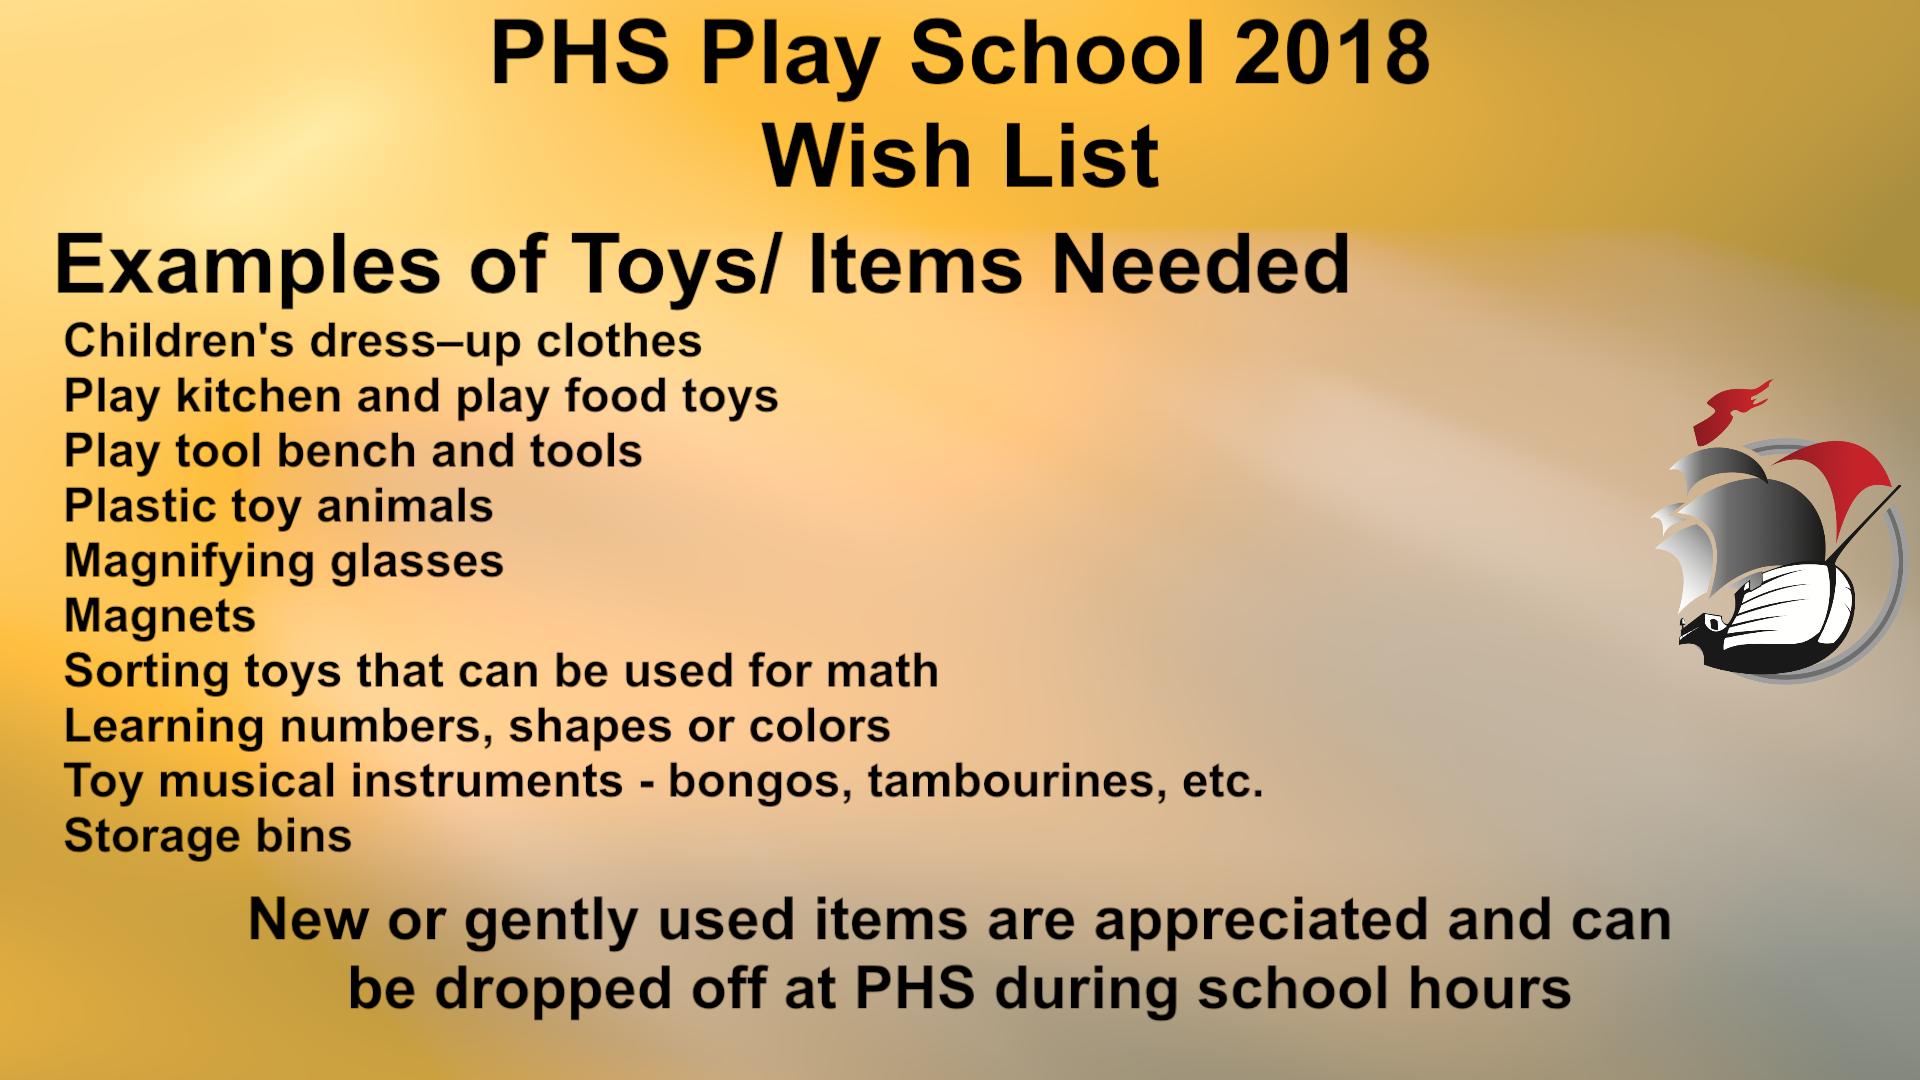 Play School starting and toy donations are requested.